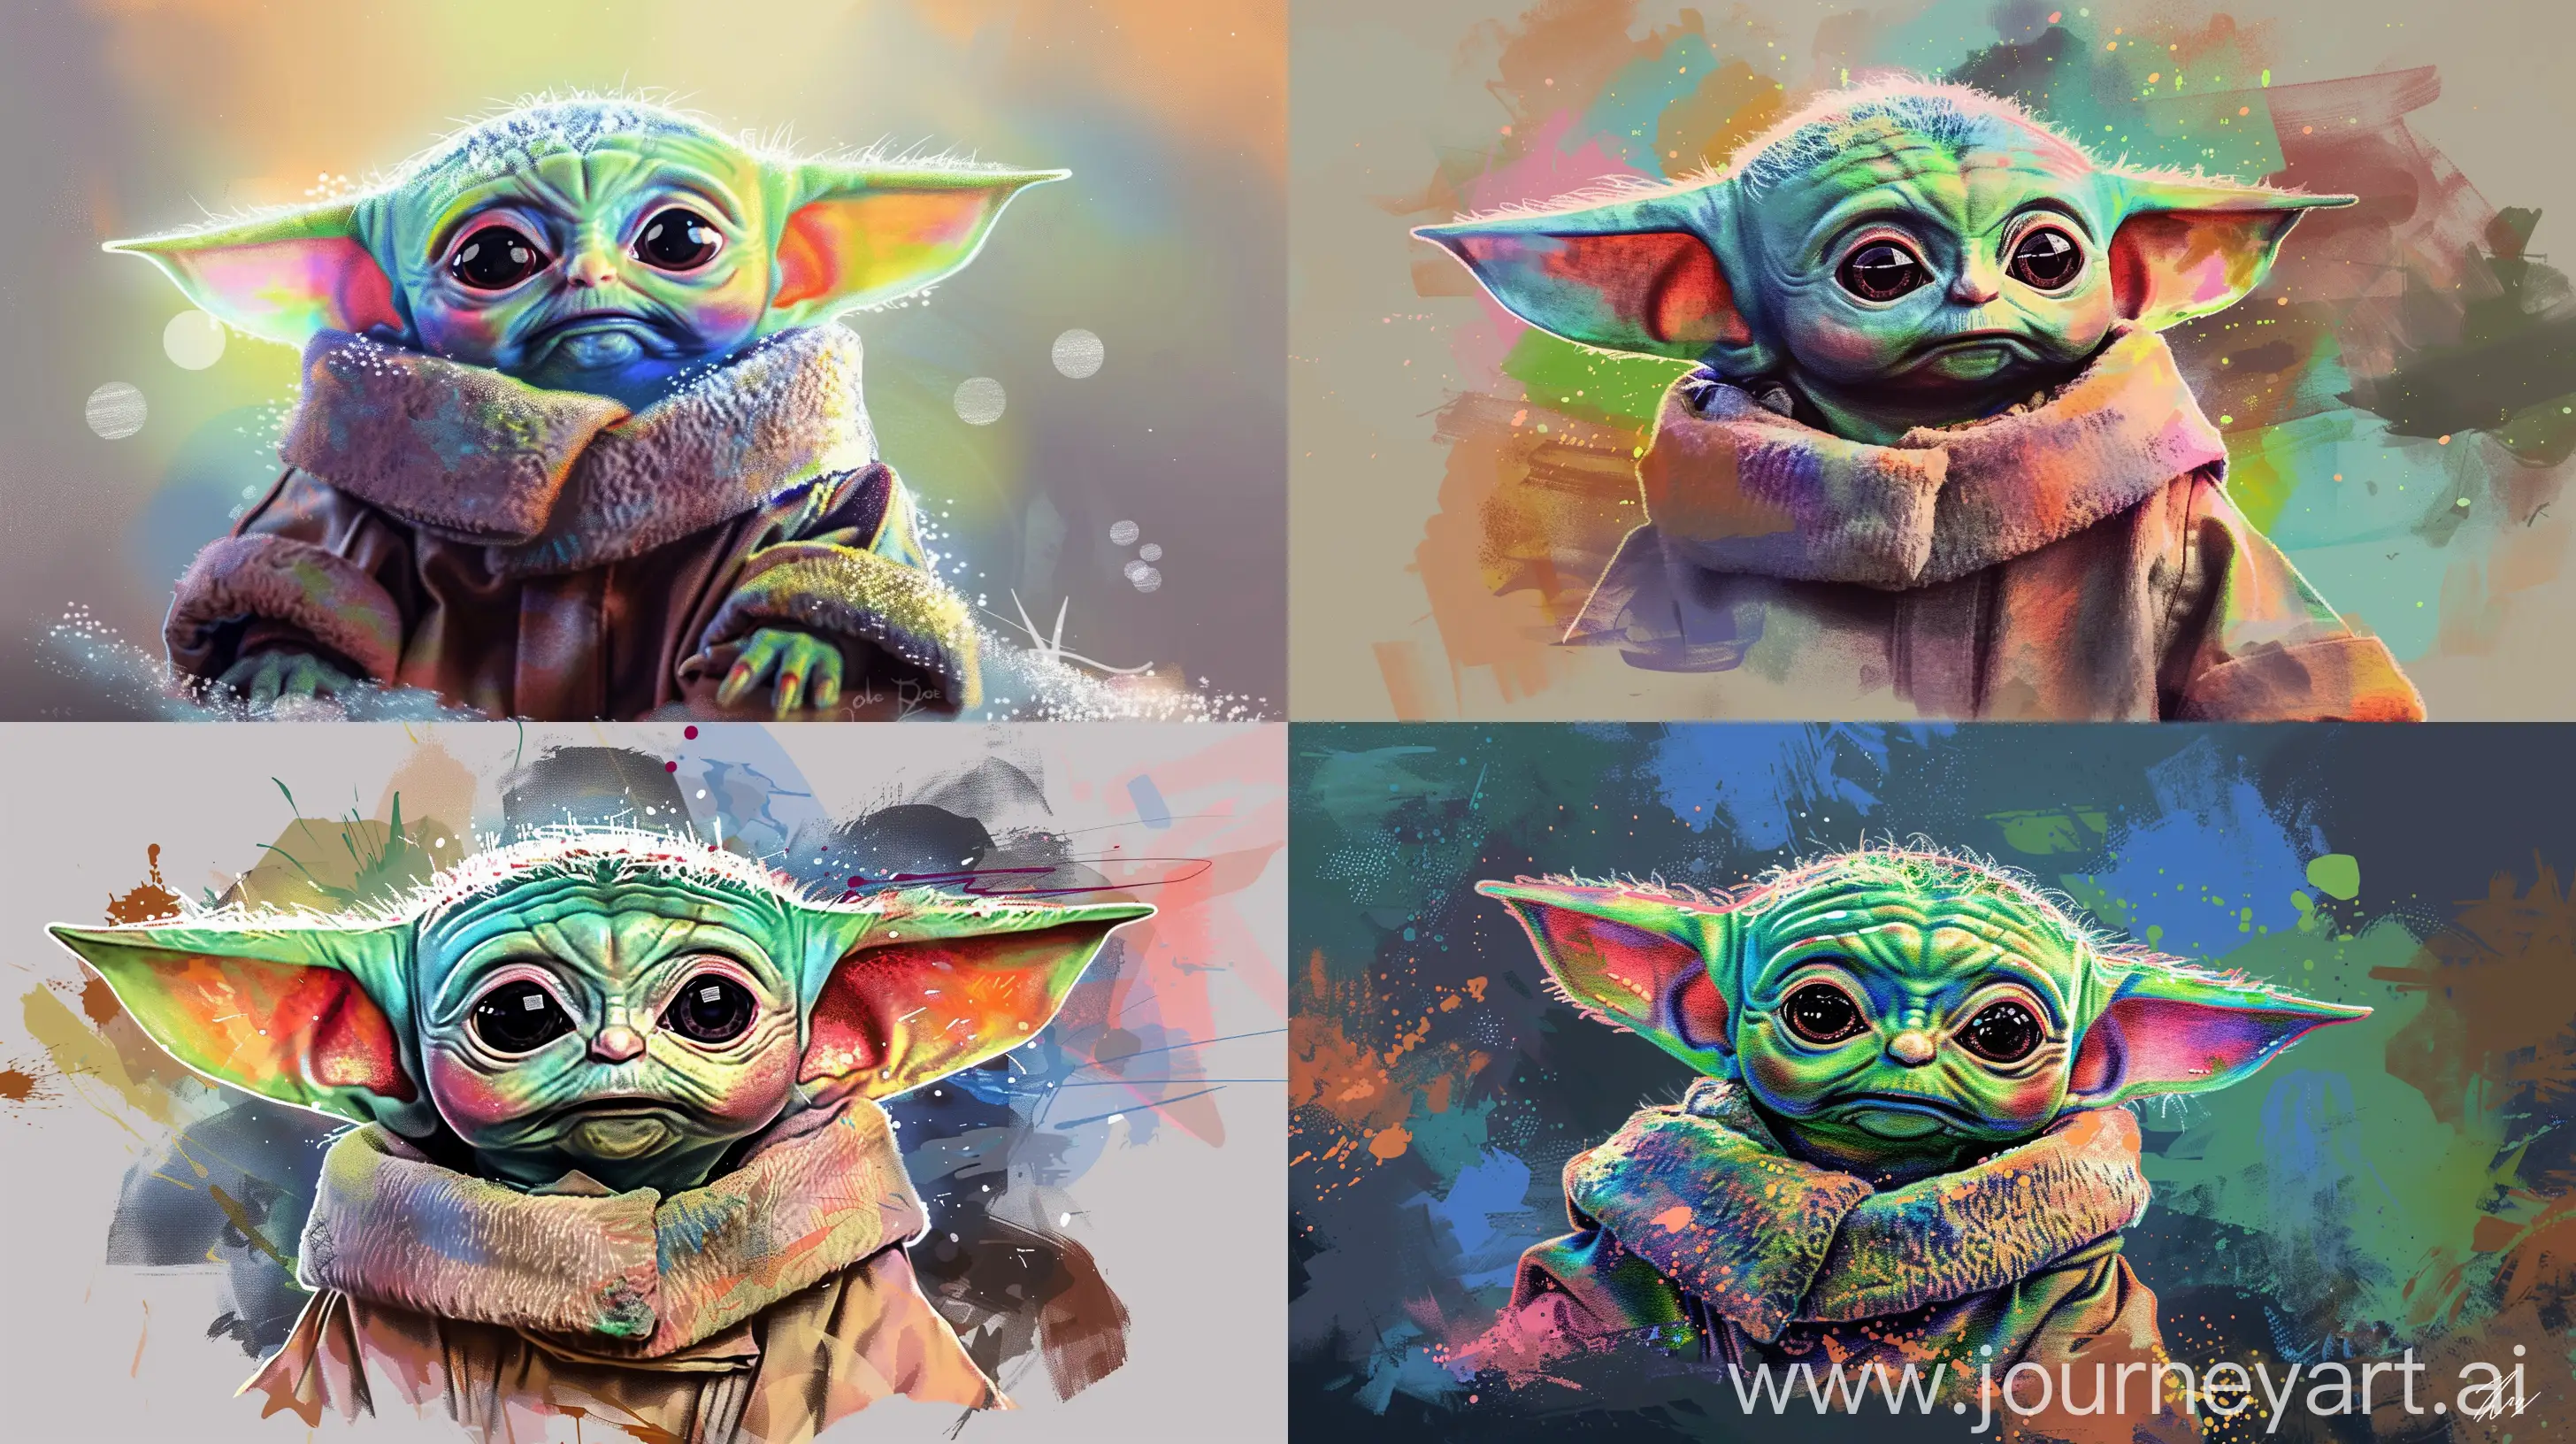 Adorable-Baby-Yoda-Pen-Sketch-with-Soft-Vibrant-Pastel-Colors